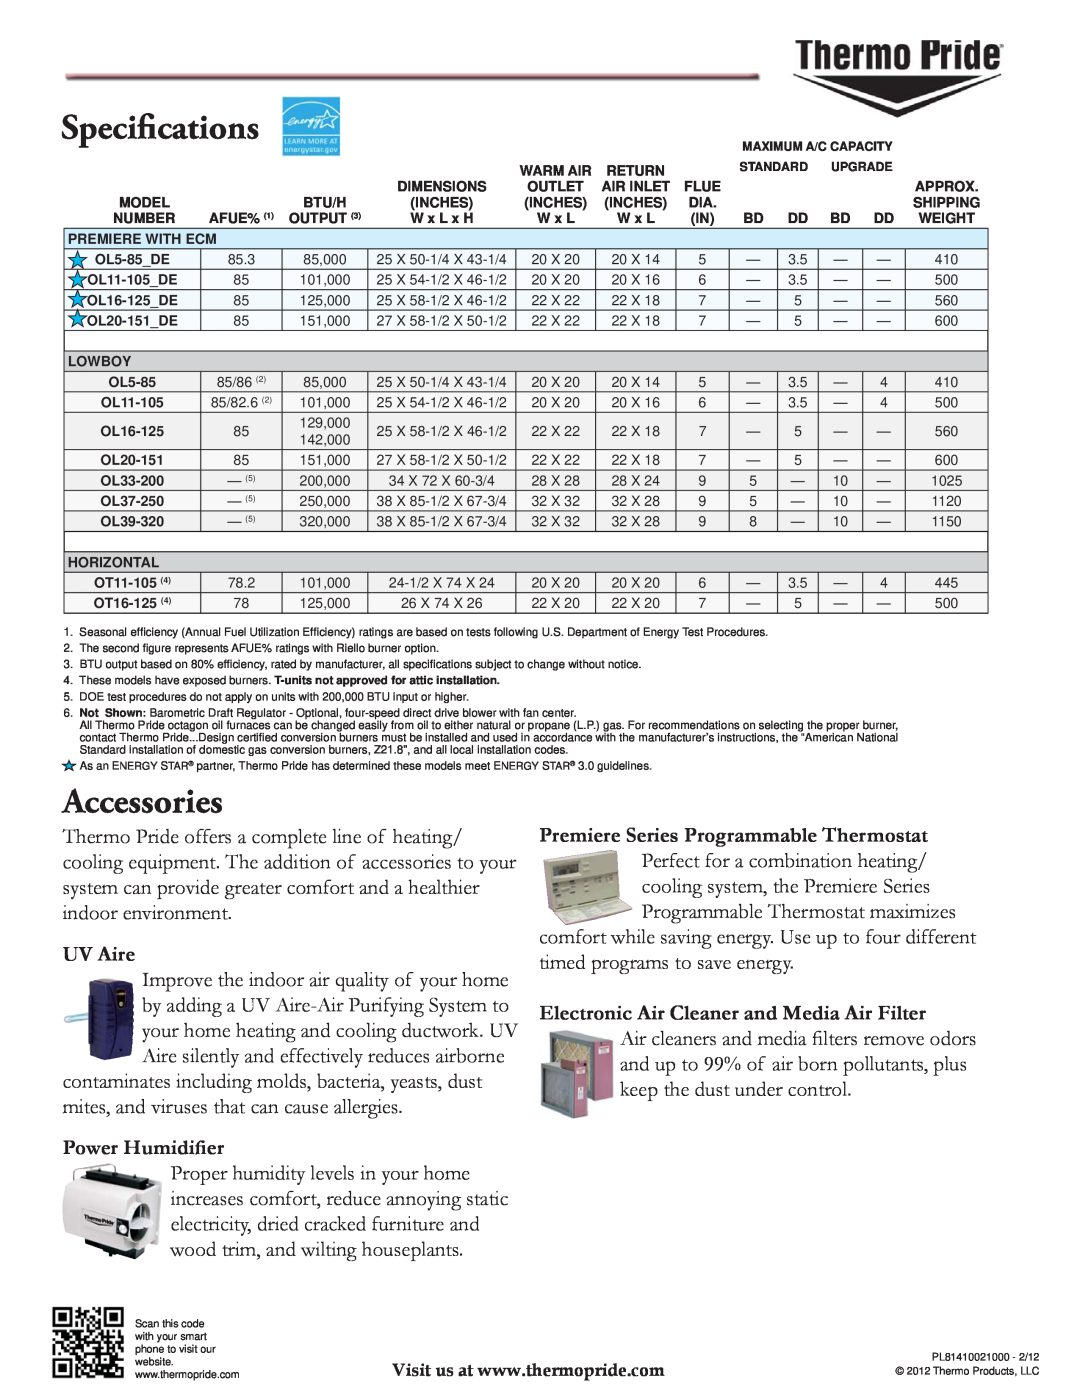 Thermo Products OL5-OL39 manual Specifications, Accessories, UV Aire, Power Humidiﬁer 